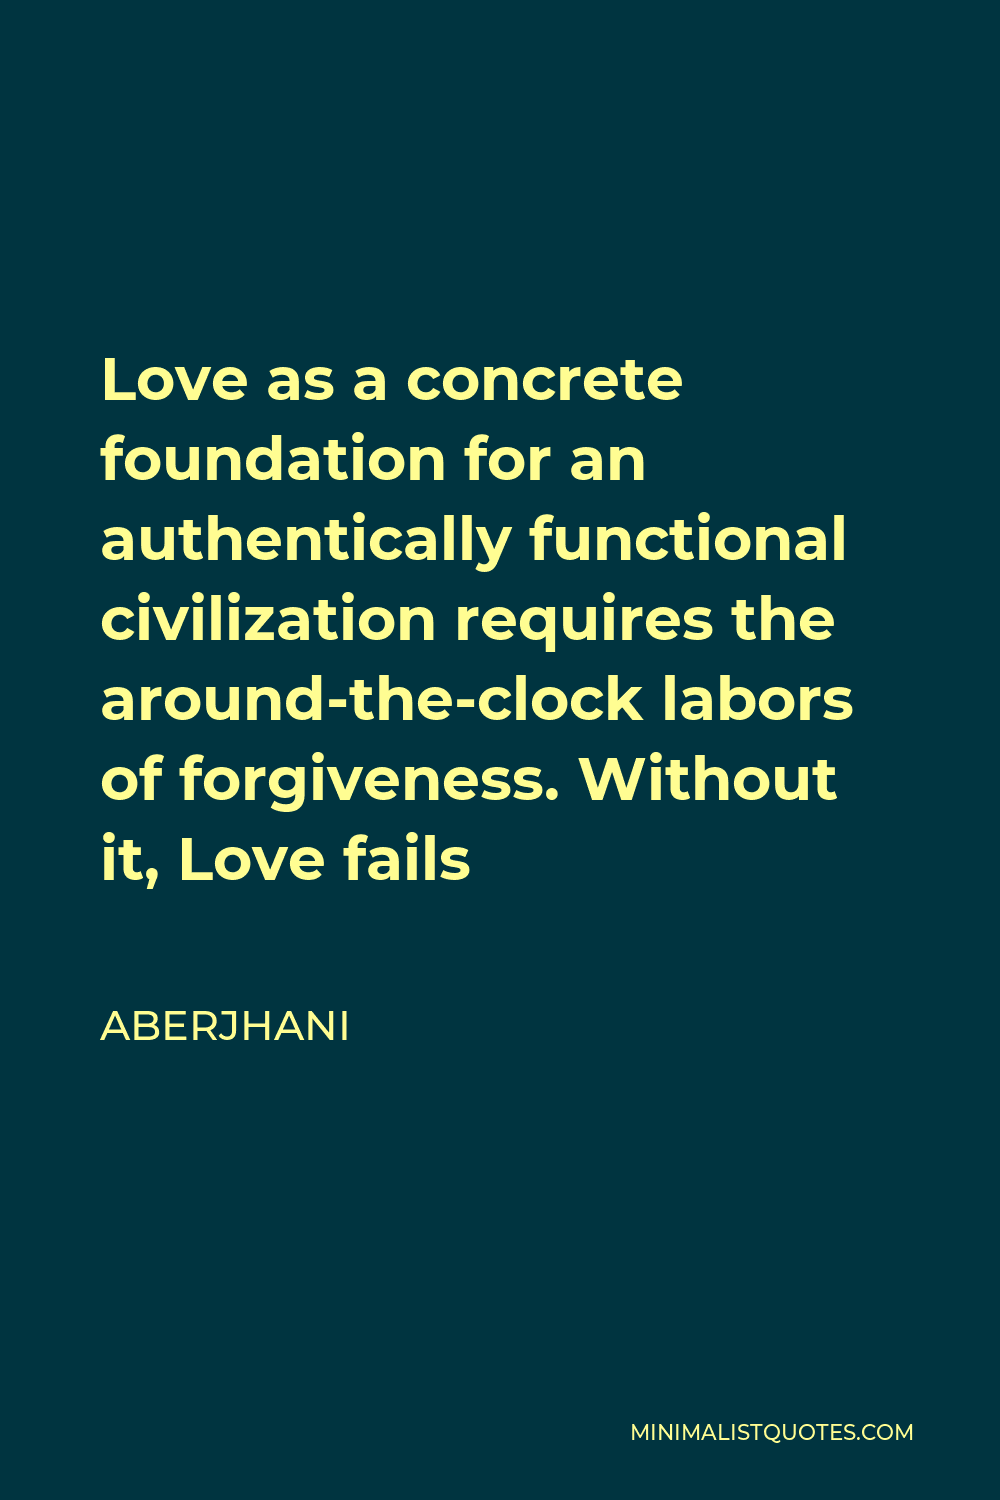 Aberjhani Quote - Love as a concrete foundation for an authentically functional civilization requires the around-the-clock labors of forgiveness. Without it, Love fails